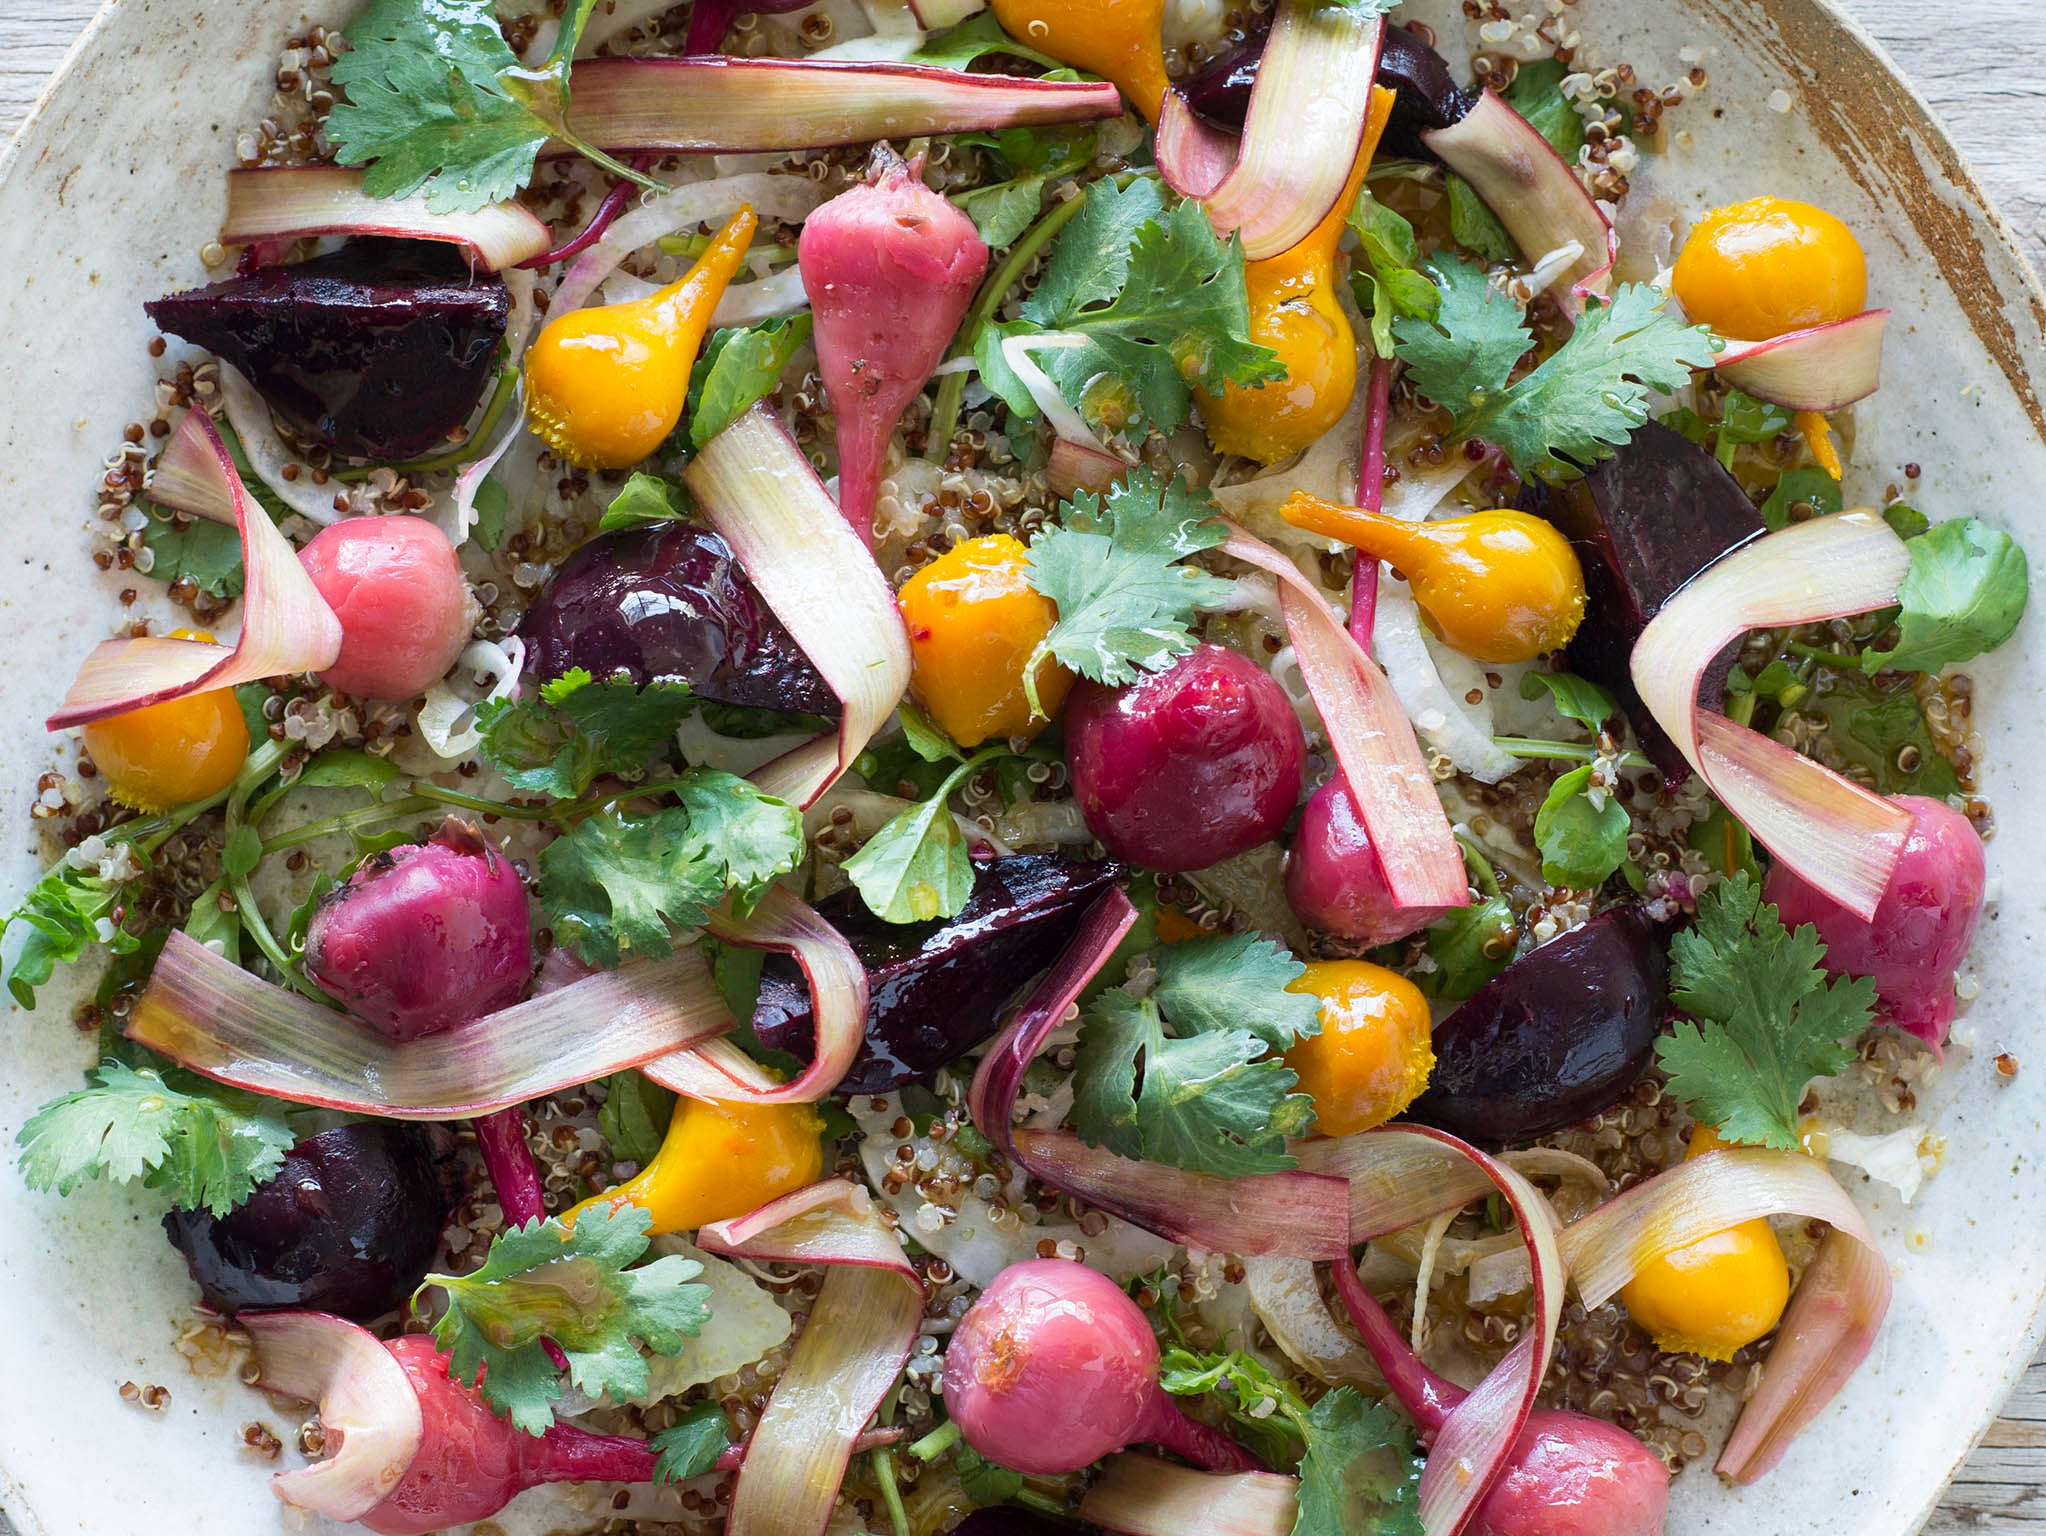 Salad gold: Beetroot can lower the risk of heart disease and stroke